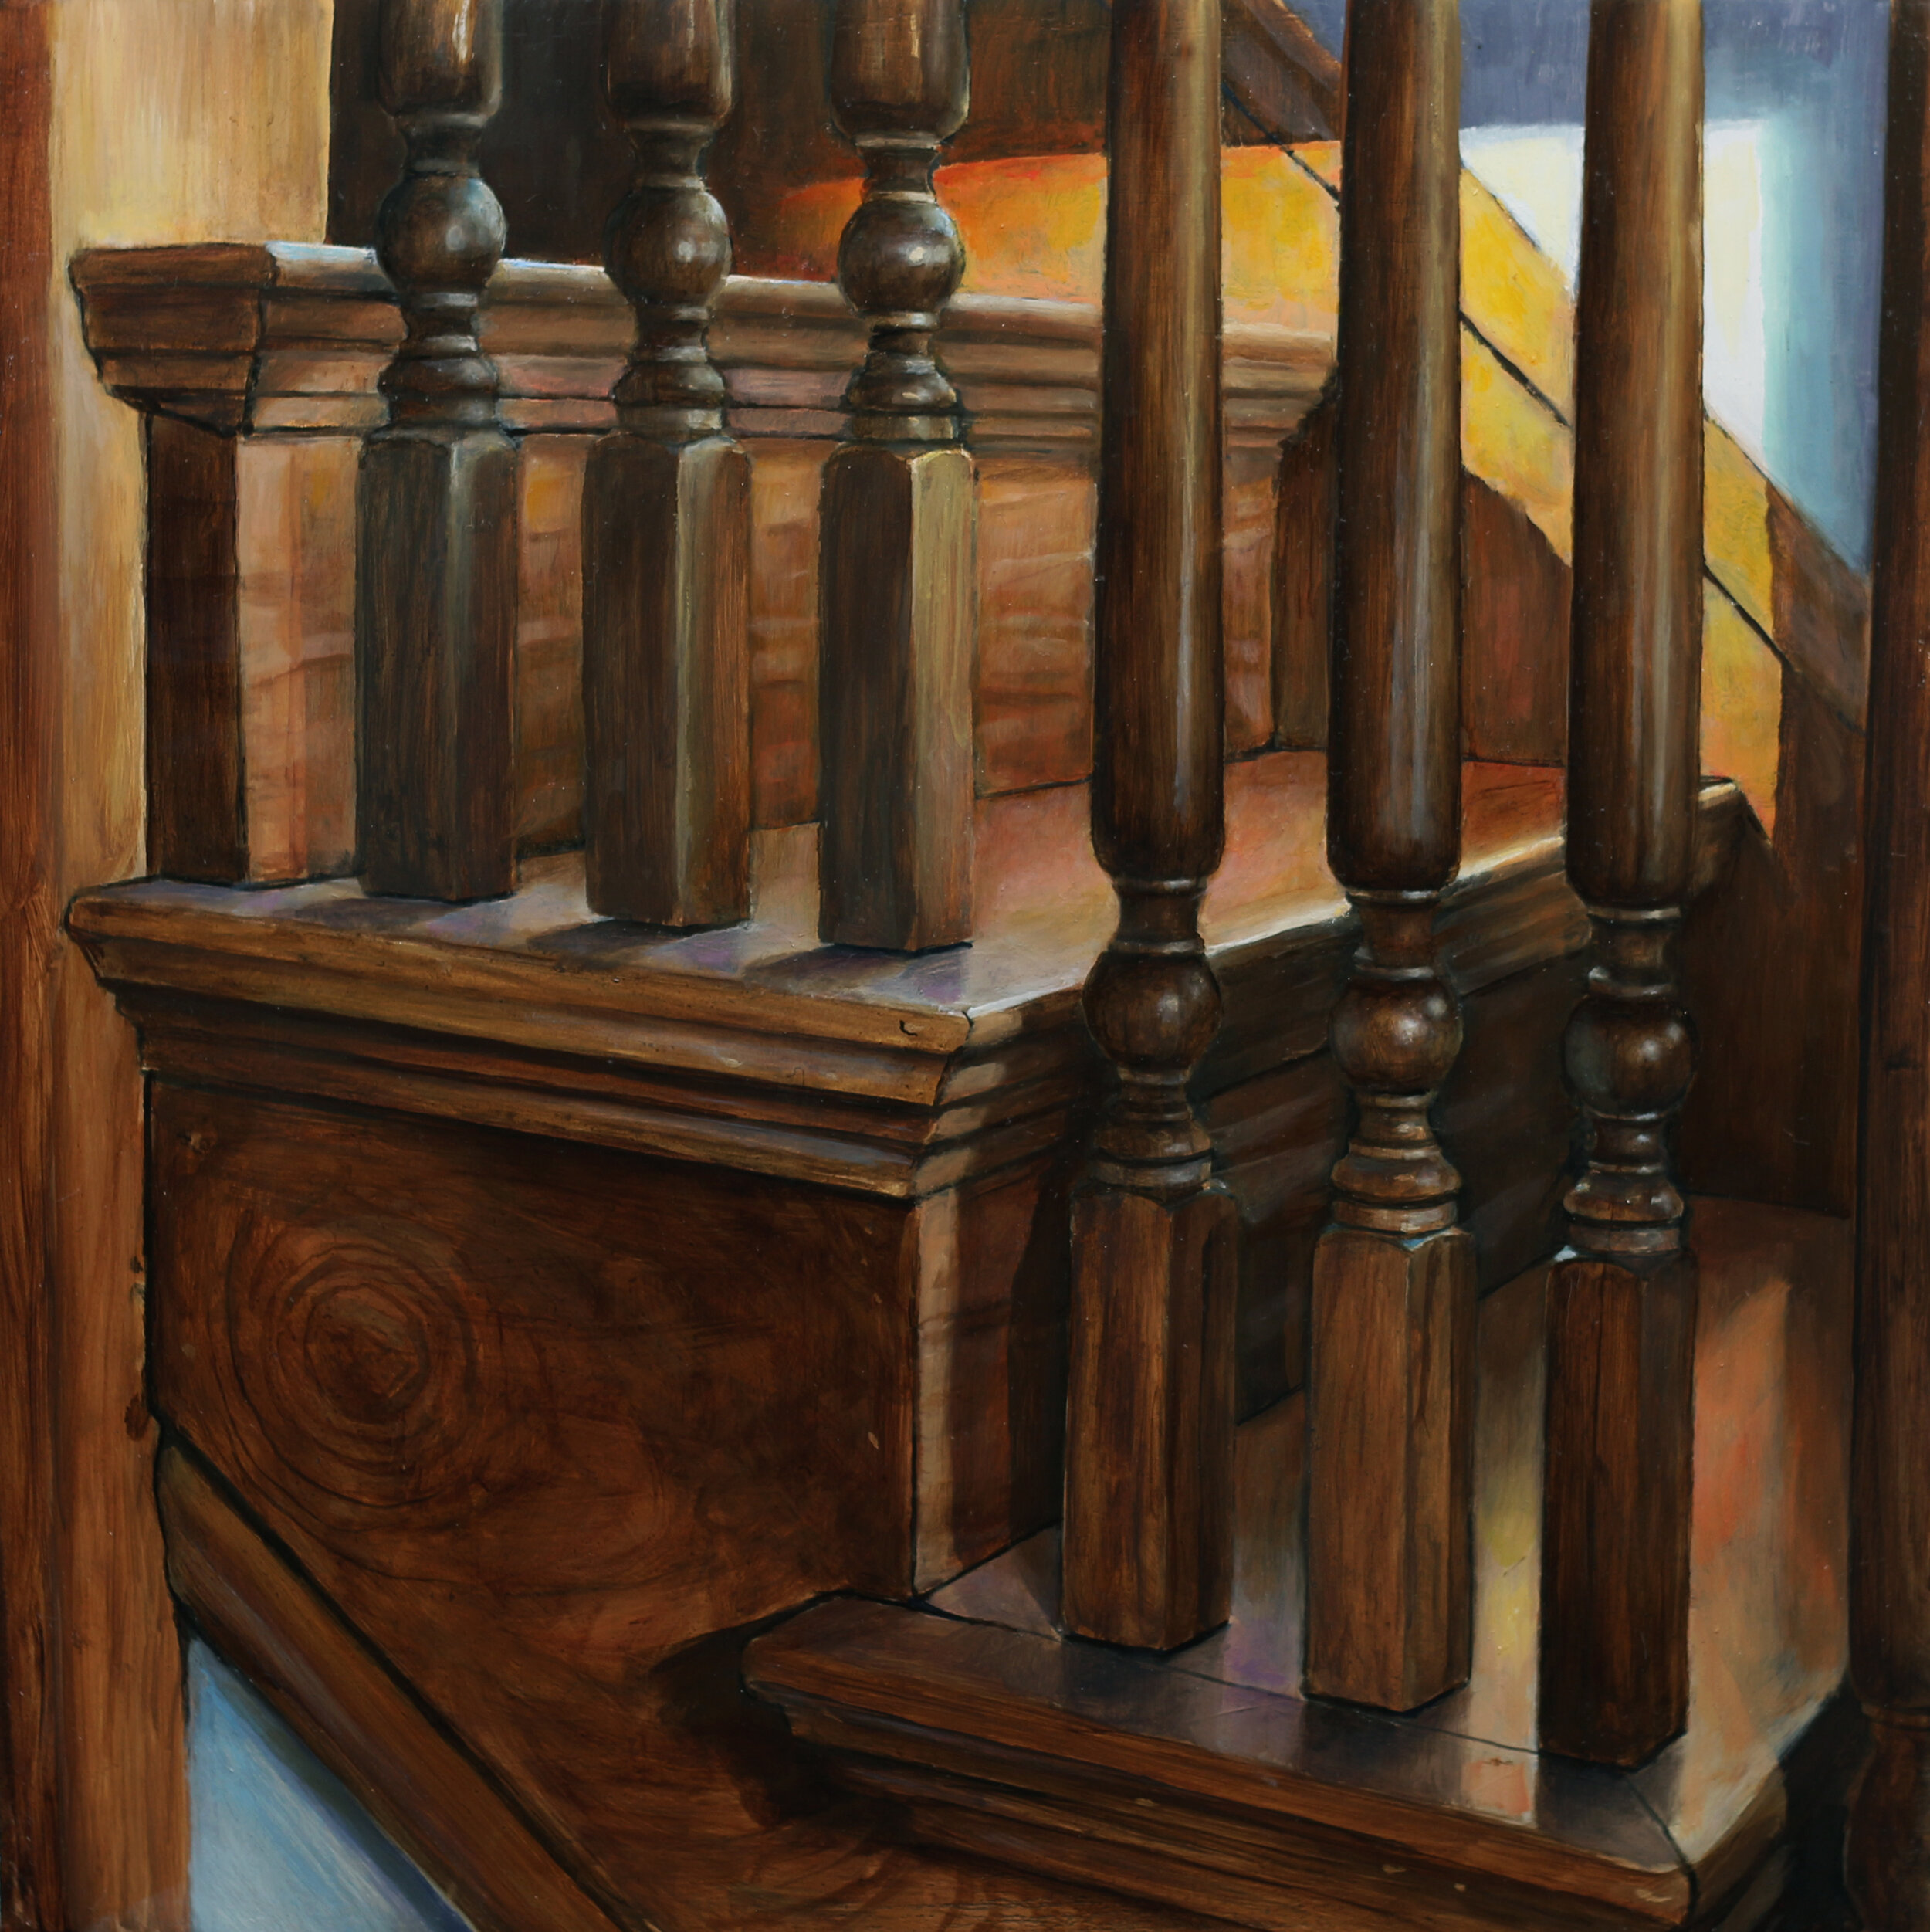   Stairs in Light   2020  Oil on panel  10 x 10 inches       